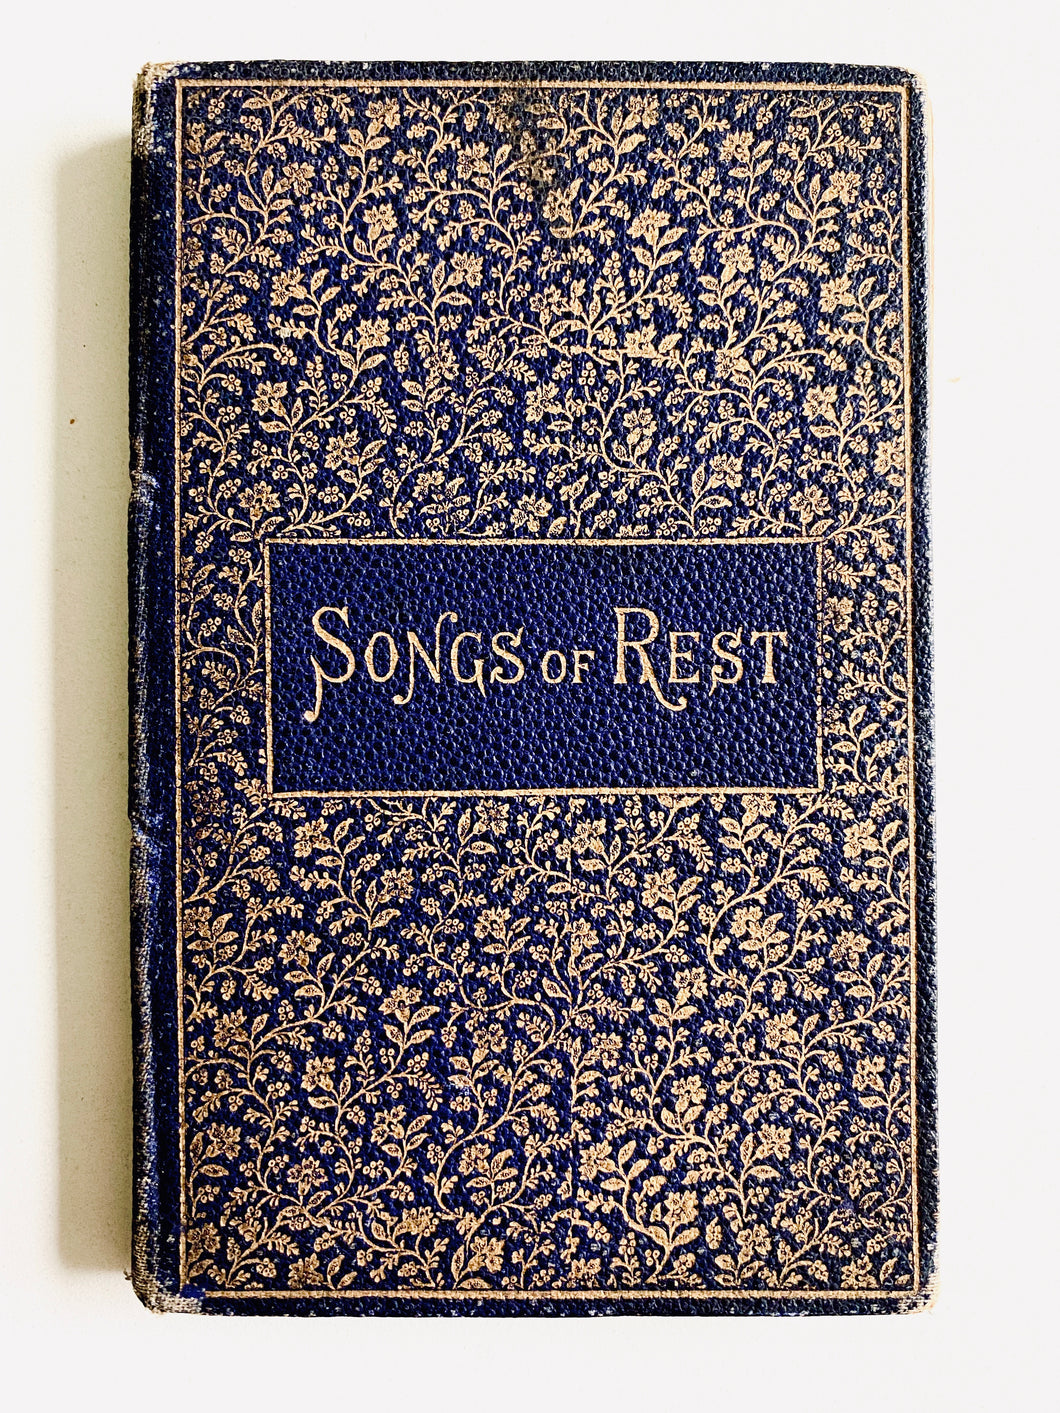 1881 GEORGE MACDONALD. Songs of Rest. Poems by MacDonald, Rossetti, etc.,